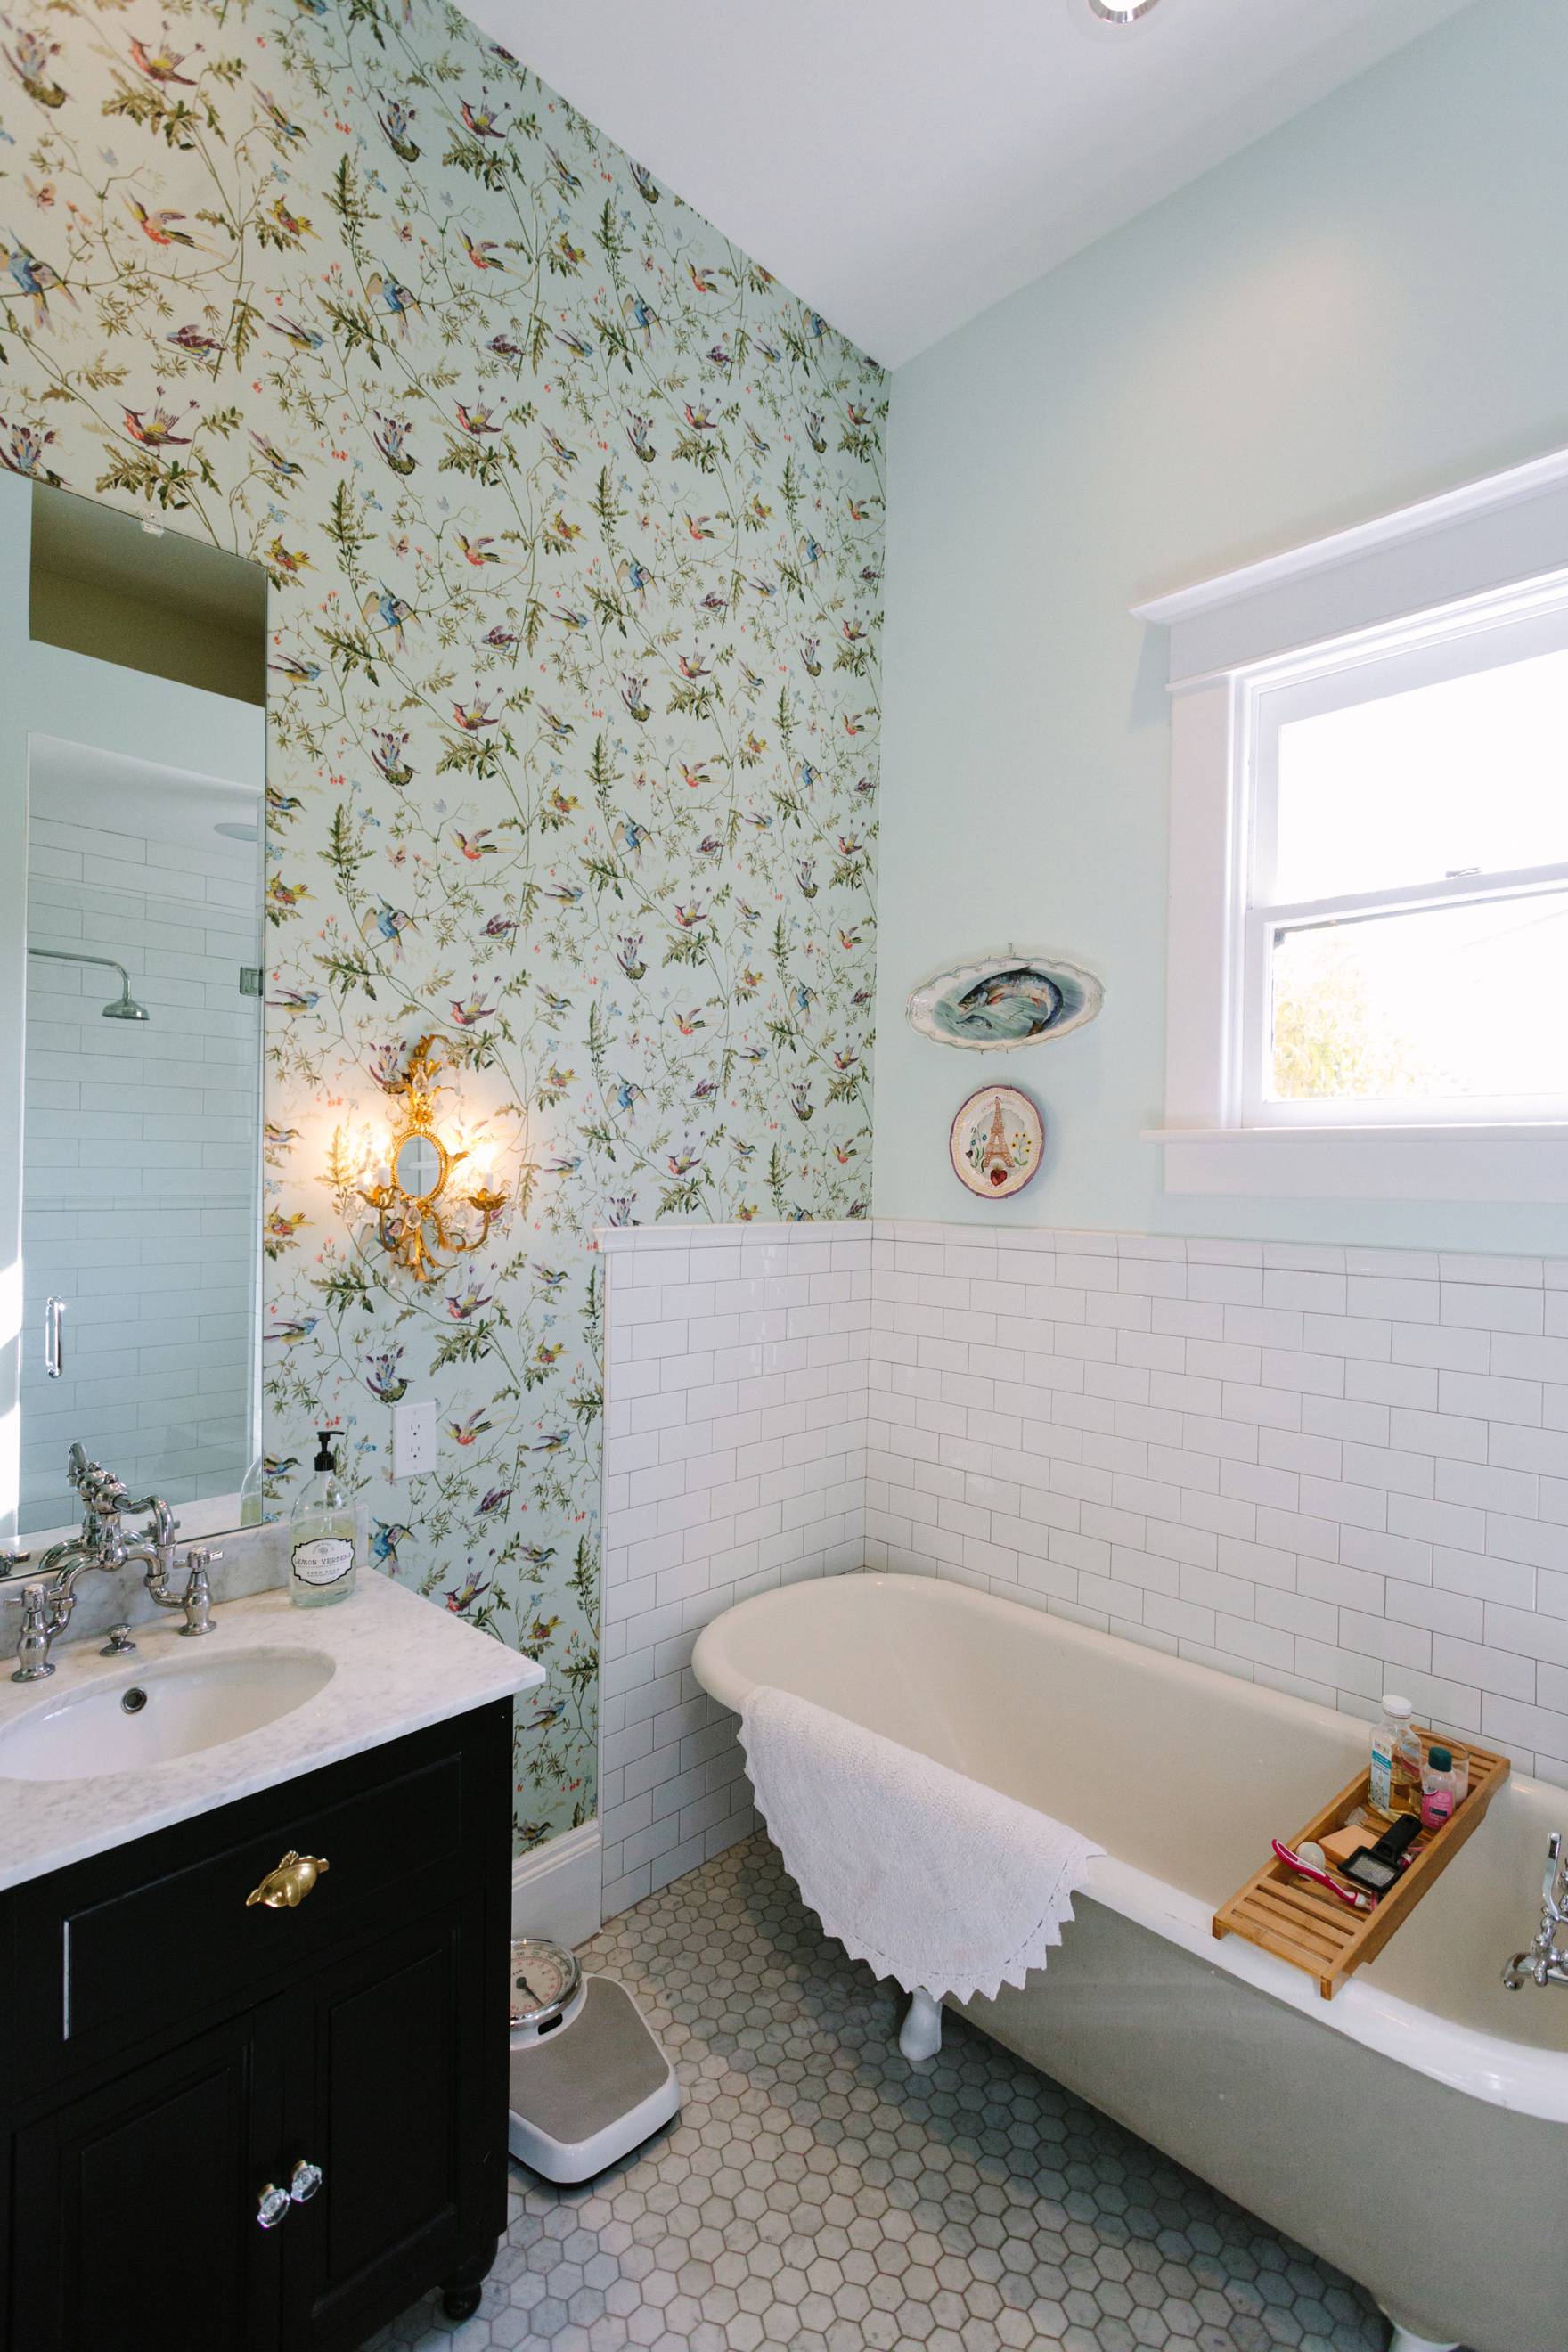 Home Tour of Boho Farm and Home in Downtown Phoenix - cottage brick style home from 1903 bathroom white subway tile and wallpaper French style